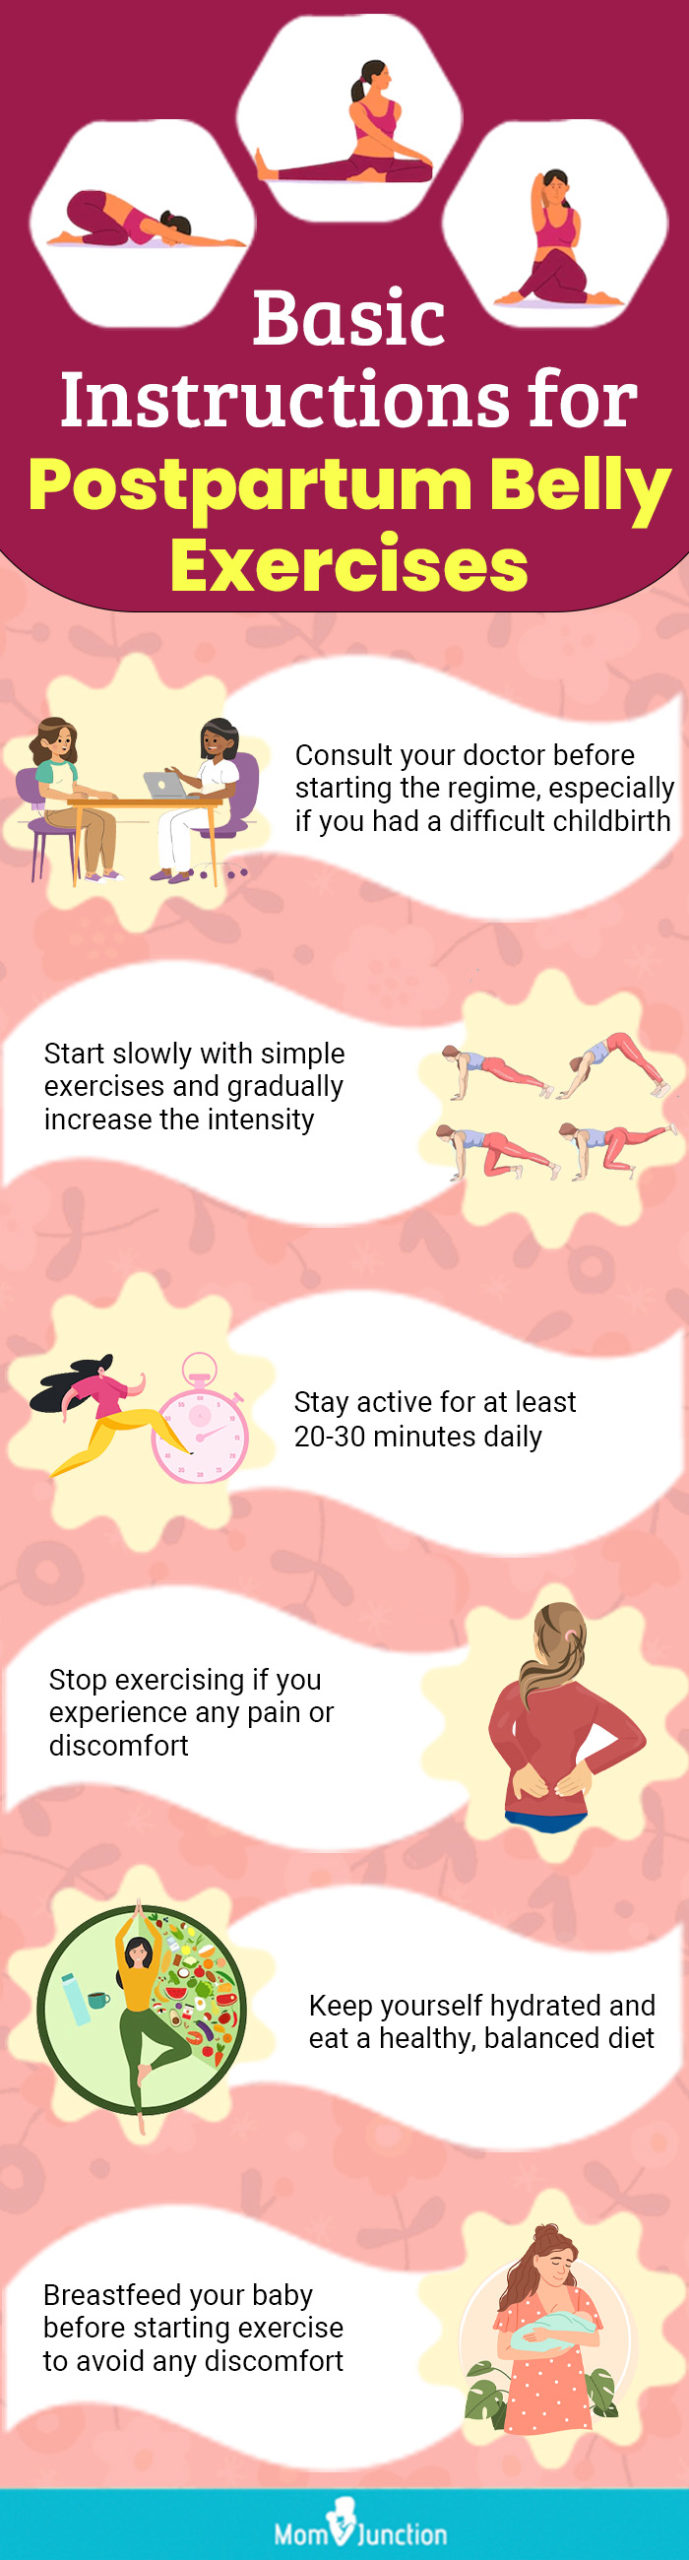 Postnatal exercise: how soon can I start again after a baby